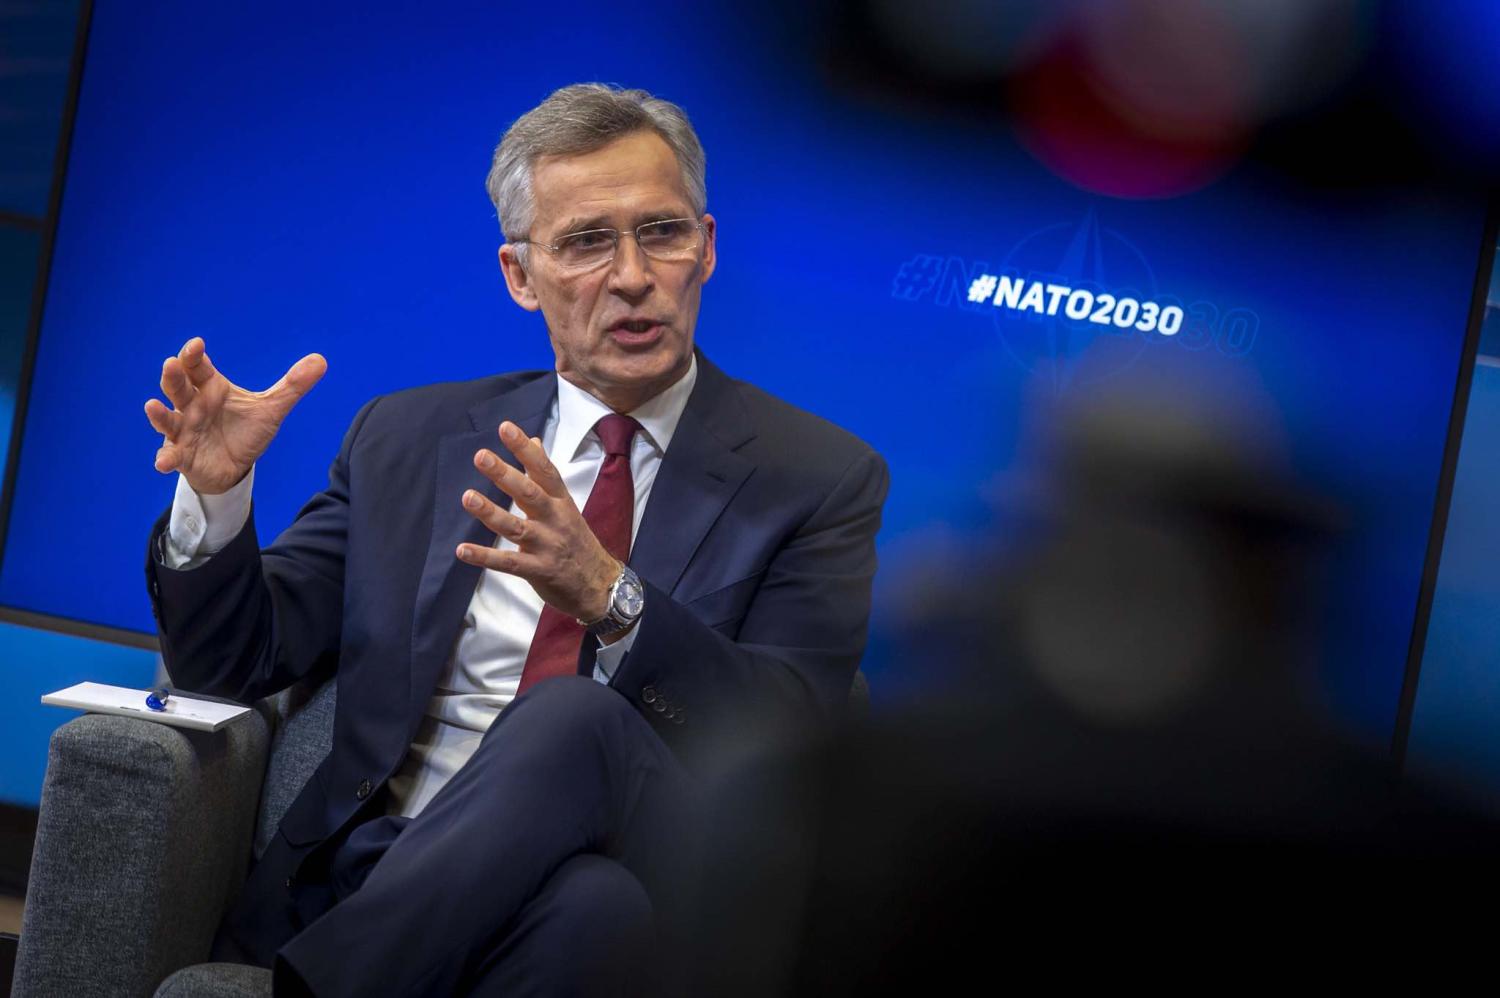   NATO Secretary General Jens Stoltenberg launched his outline for NATO 2030 in an online conversation on 8 June (NATO/Flickr)